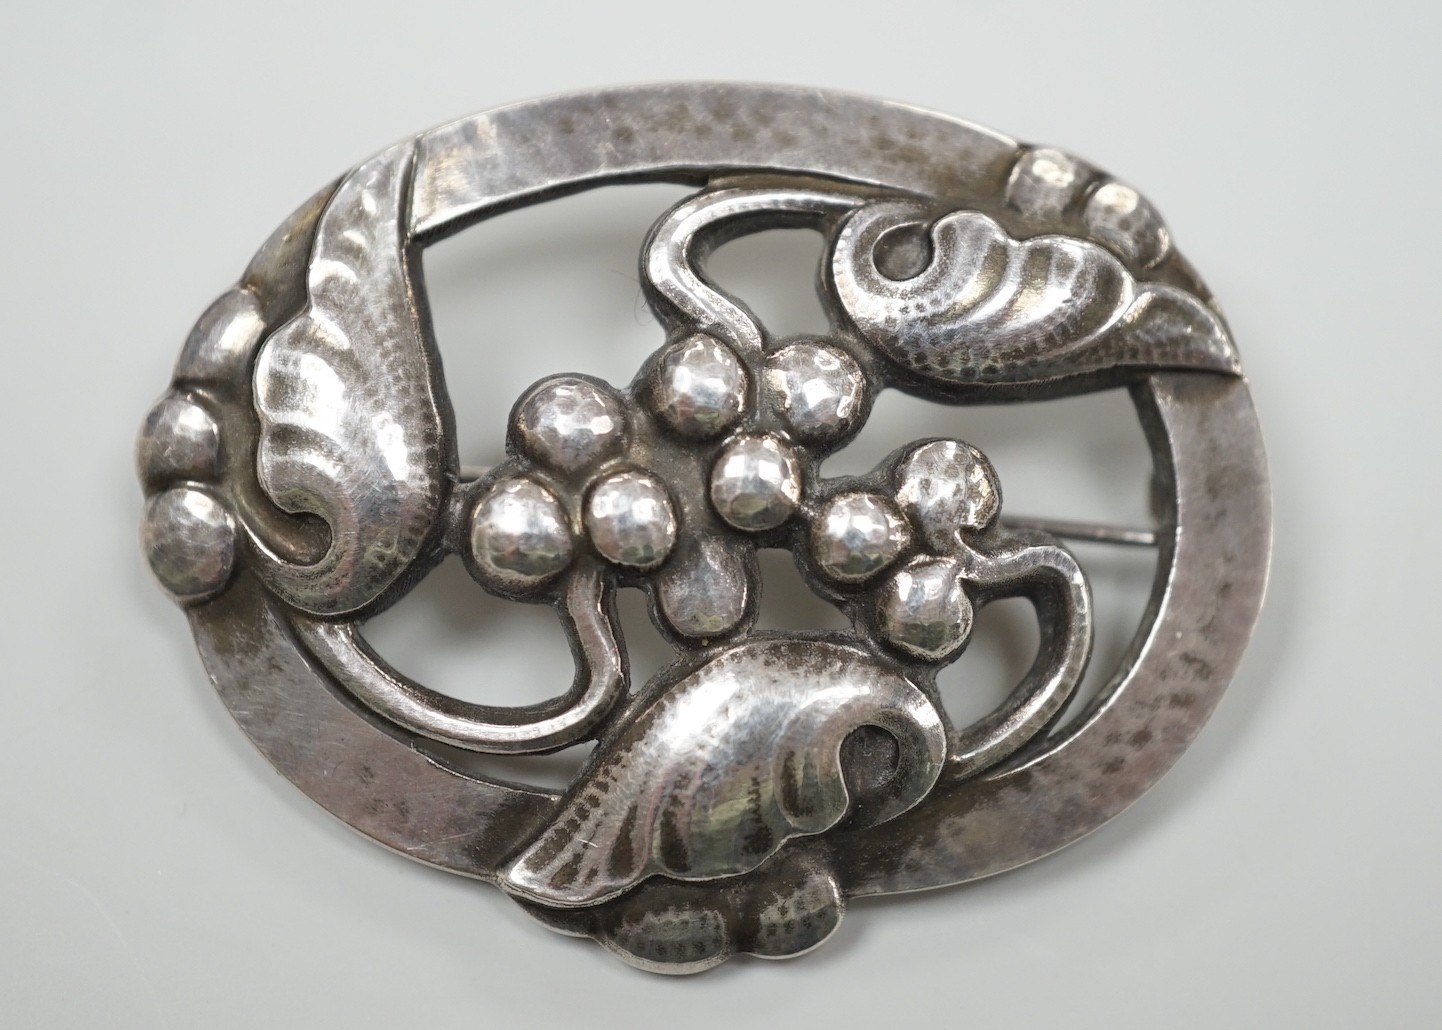 A Georg Jensen modern sterling silver oval leaf and berry brooch, design no. 101, 48mm, with